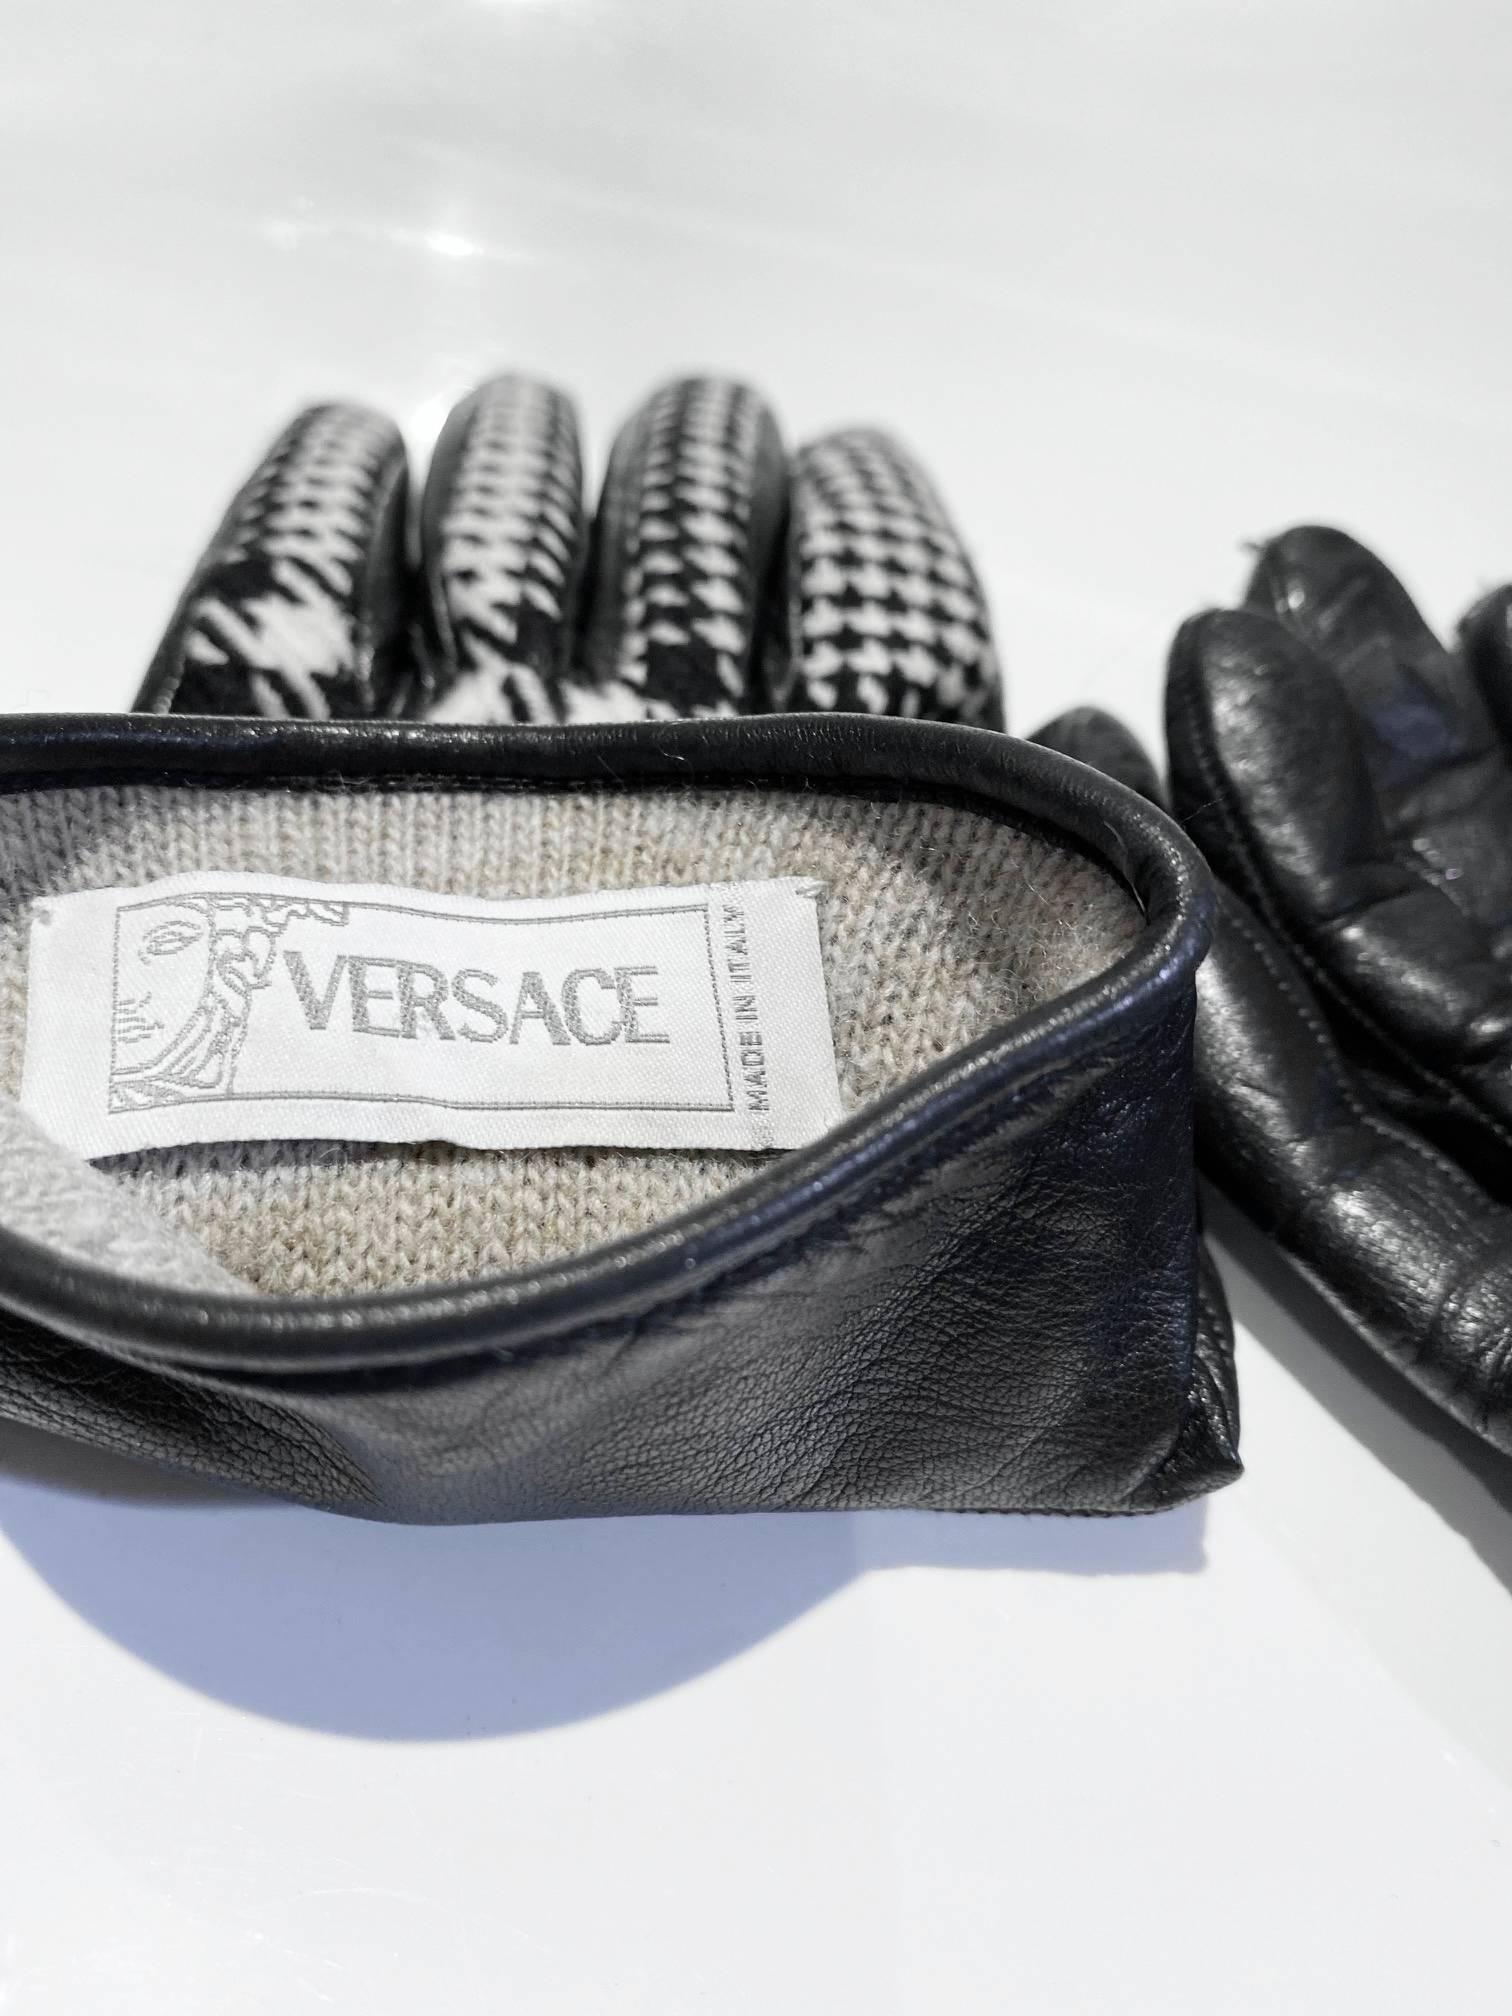 Gianni Versace dogtooth wool winter gloves, black leather, Medusa silver toned metal logo, Made in Italy 
Condition: 1990s, vintage, good, slight sign of wear on leather 
Size: 7.5 - small